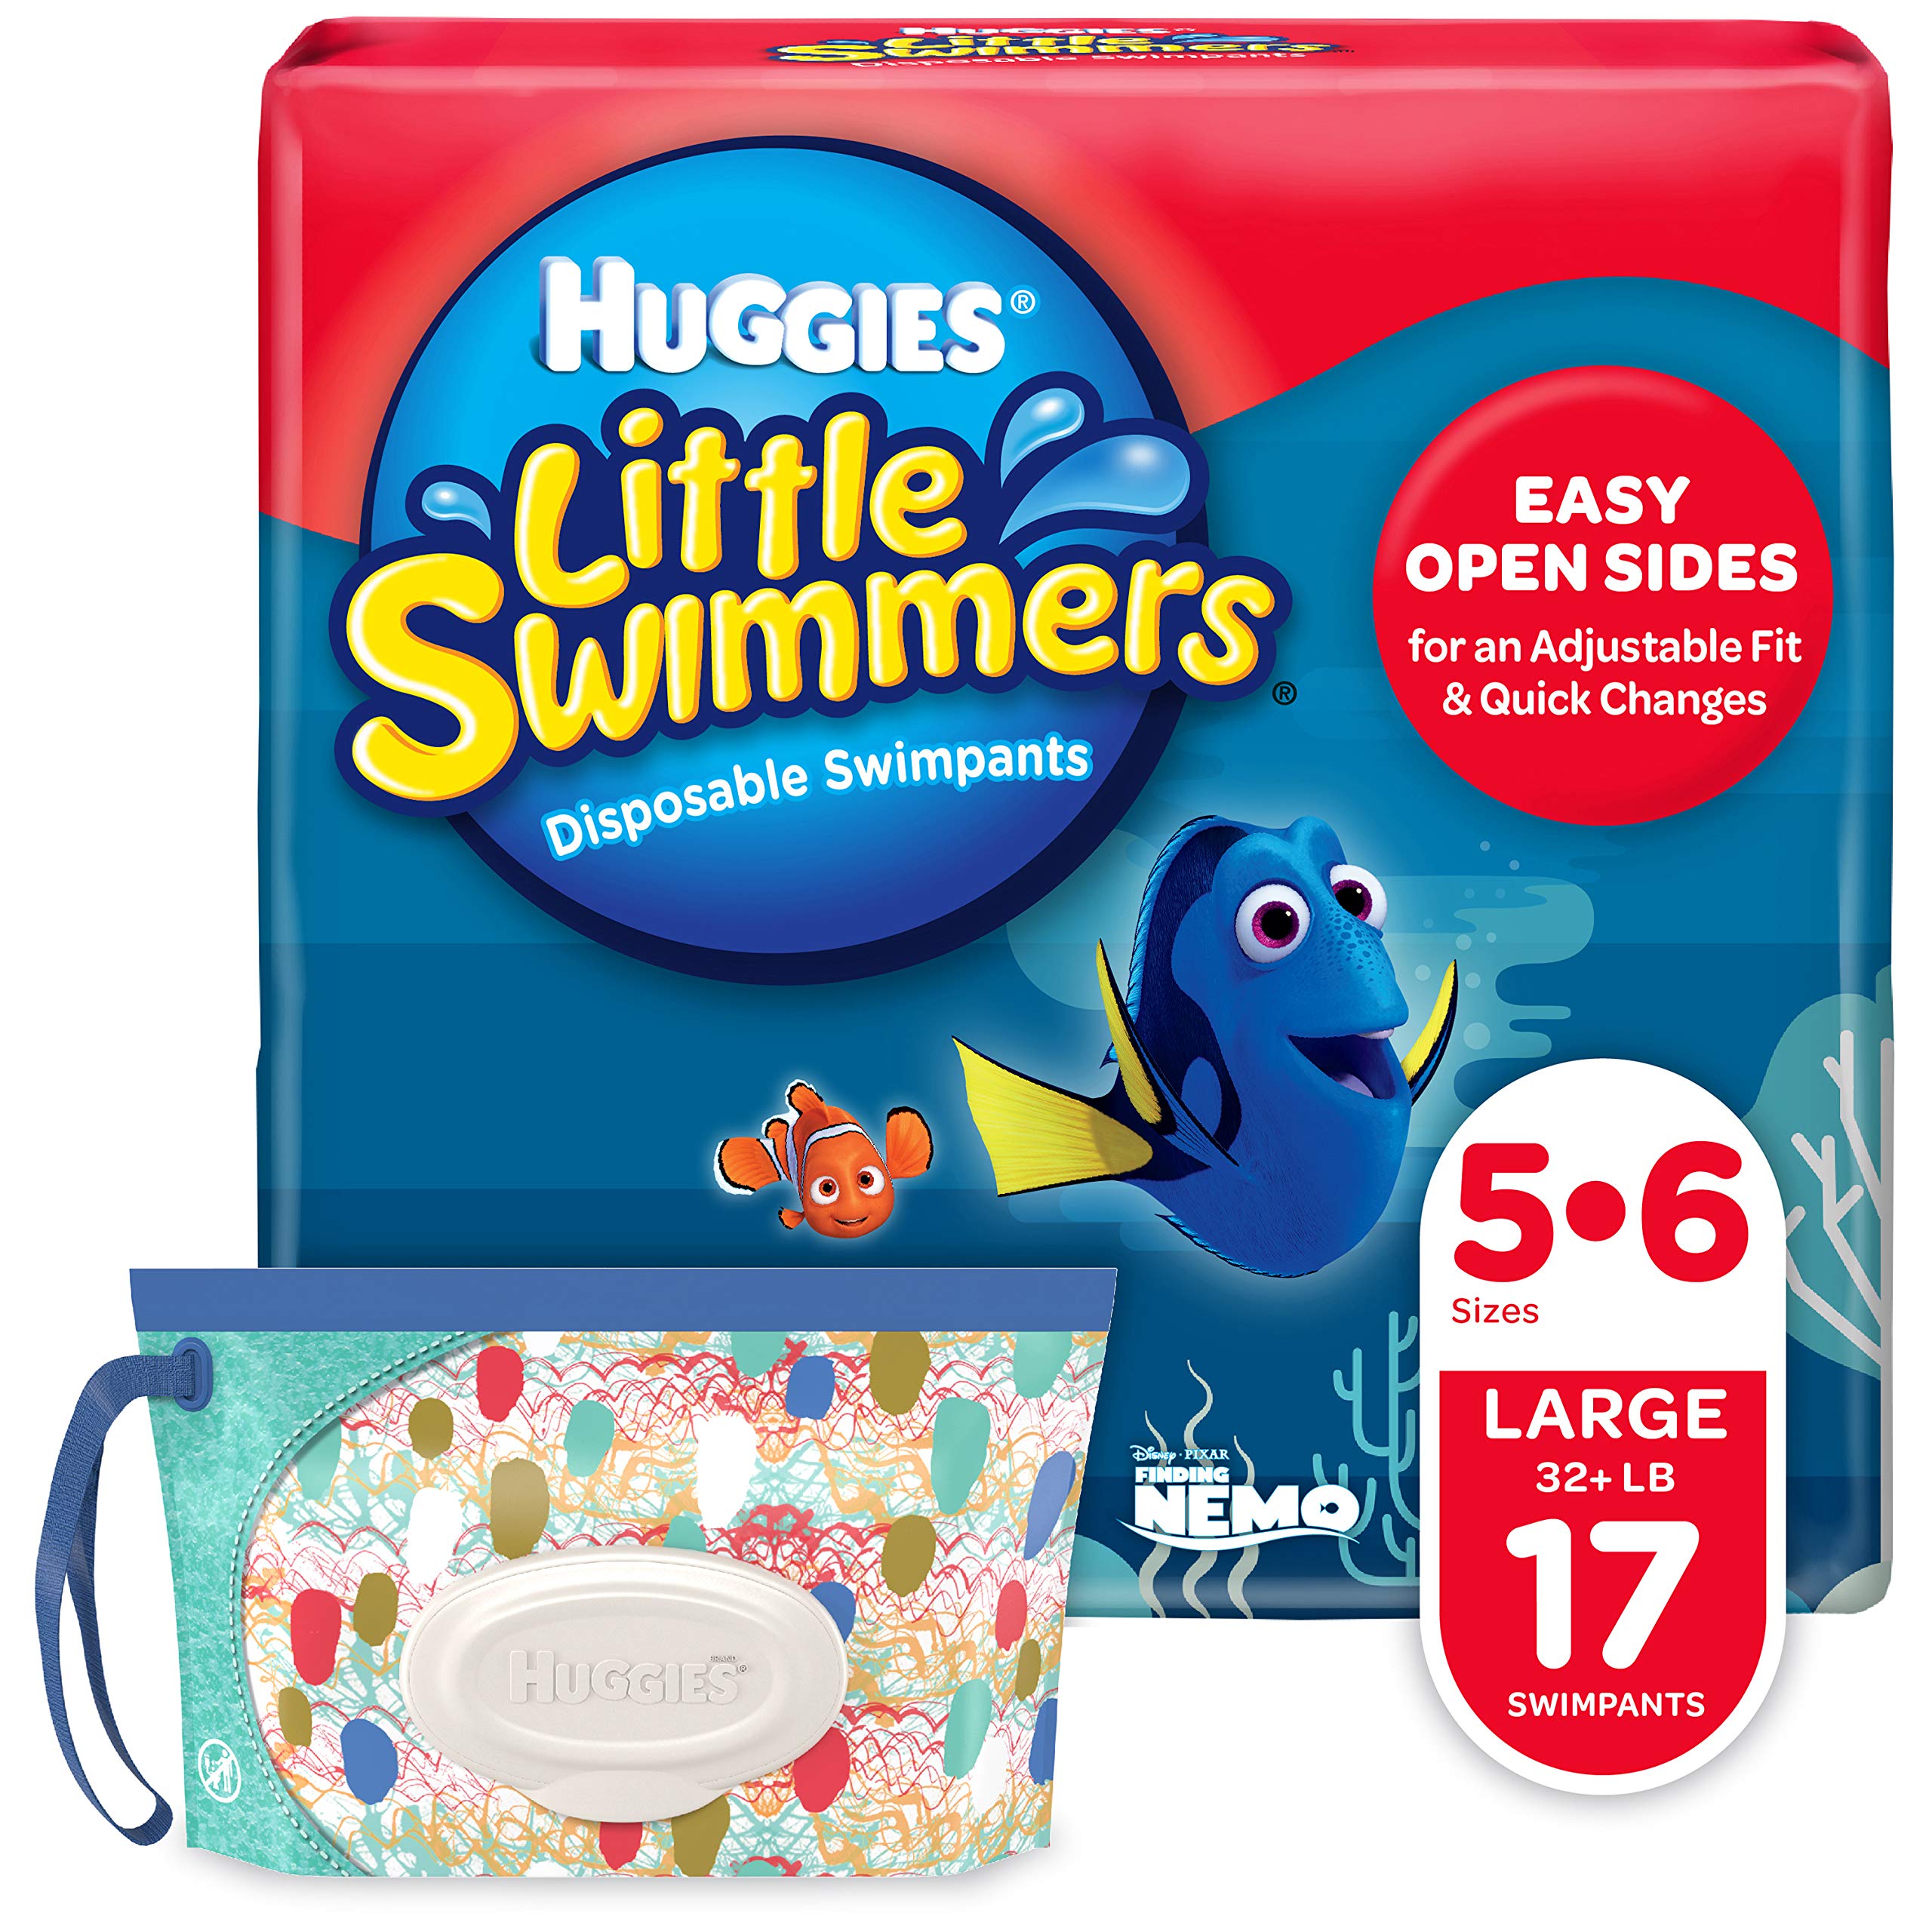 Book Cover Huggies Little Swimmers Disposable Swim Diapers, Swimpants, Size 5-6 Large (Over 32 Pound), 17 Count, with Huggies Wipes Clutch 'N' Clean Bonus Pack (Packaging May Vary)